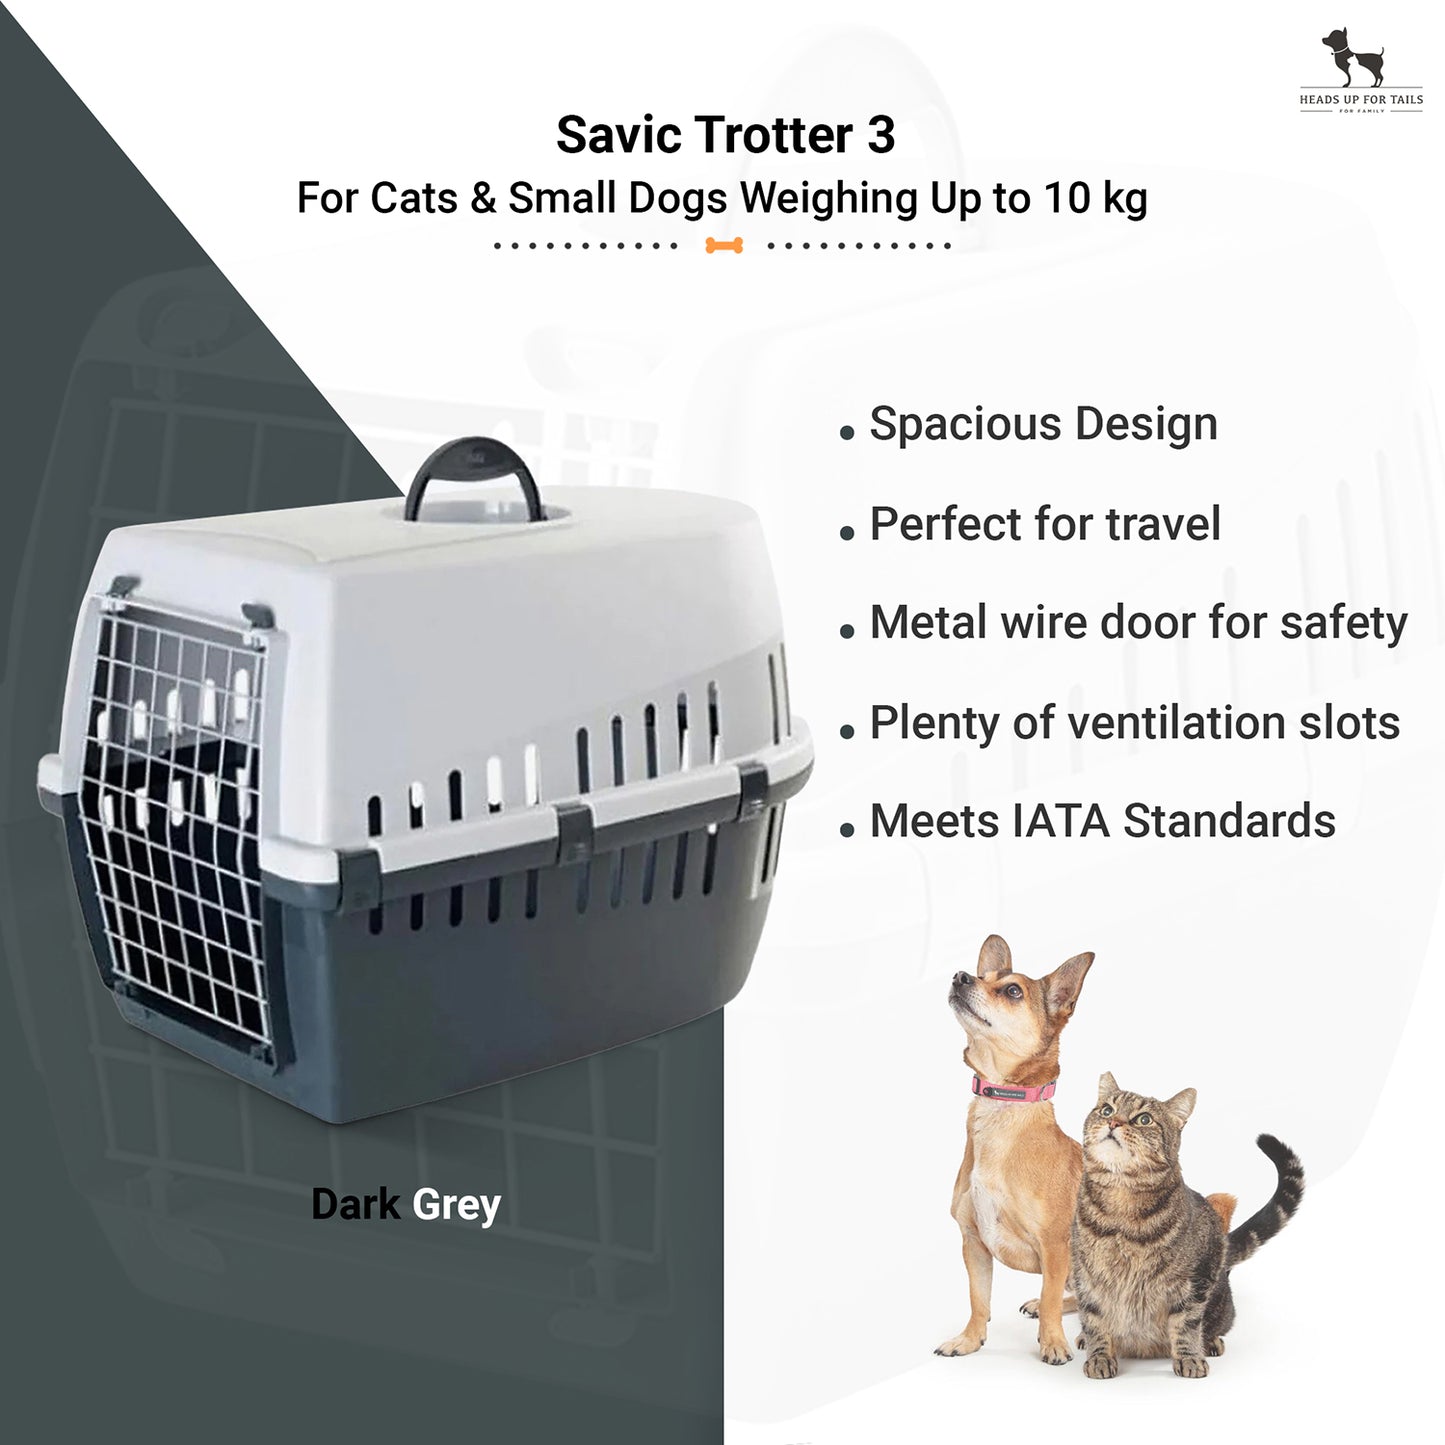 Savic Trotter 3 - Dog & Cat Carrier - Dark Grey - 24 x 16 x 15 inch - Holds up to 10 kg_02